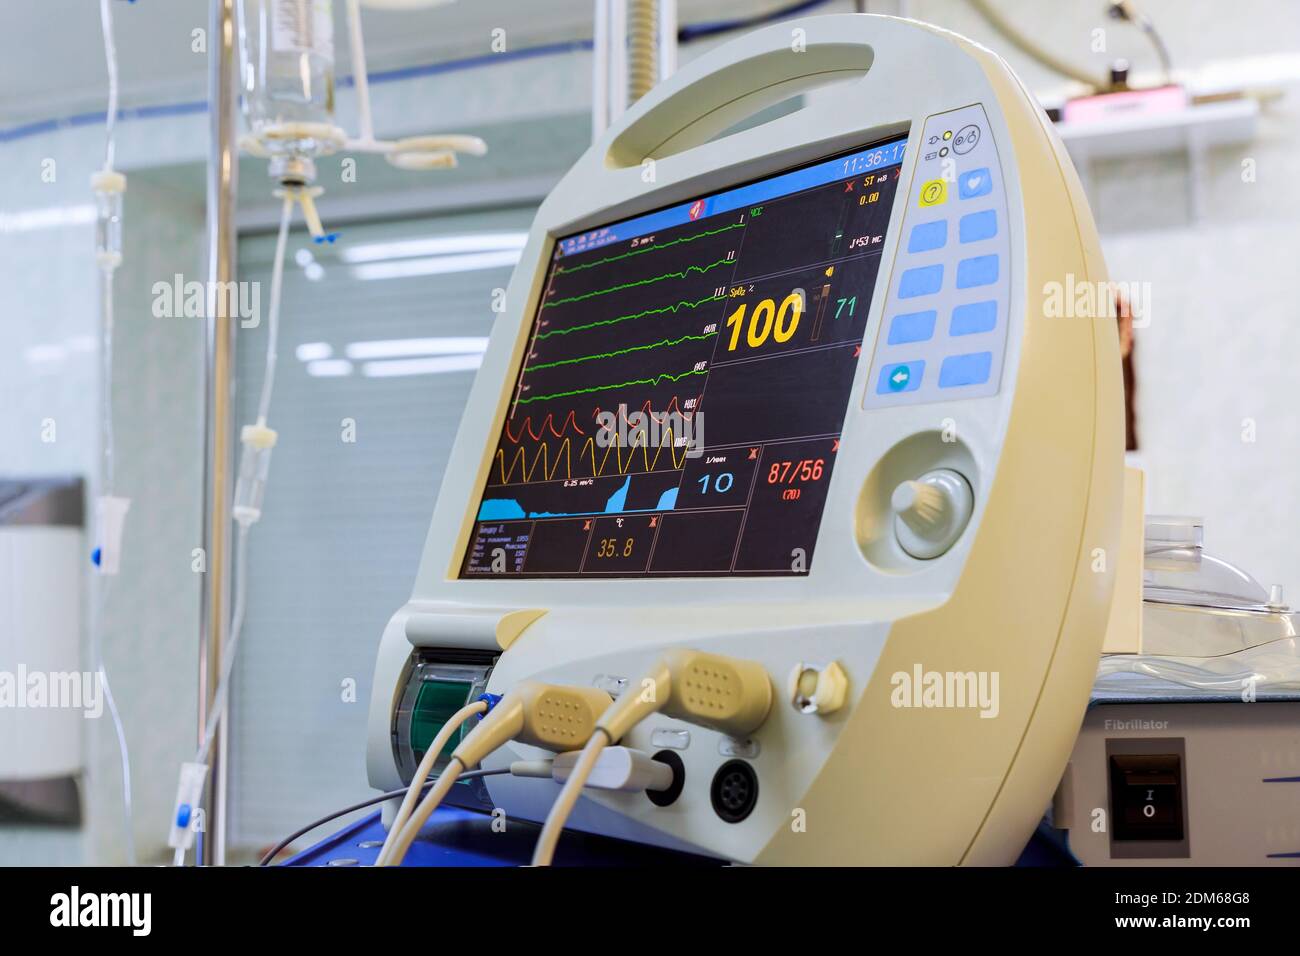 Ventilation equipment close up image monitor of computer device in intensive care operating room Stock Photo